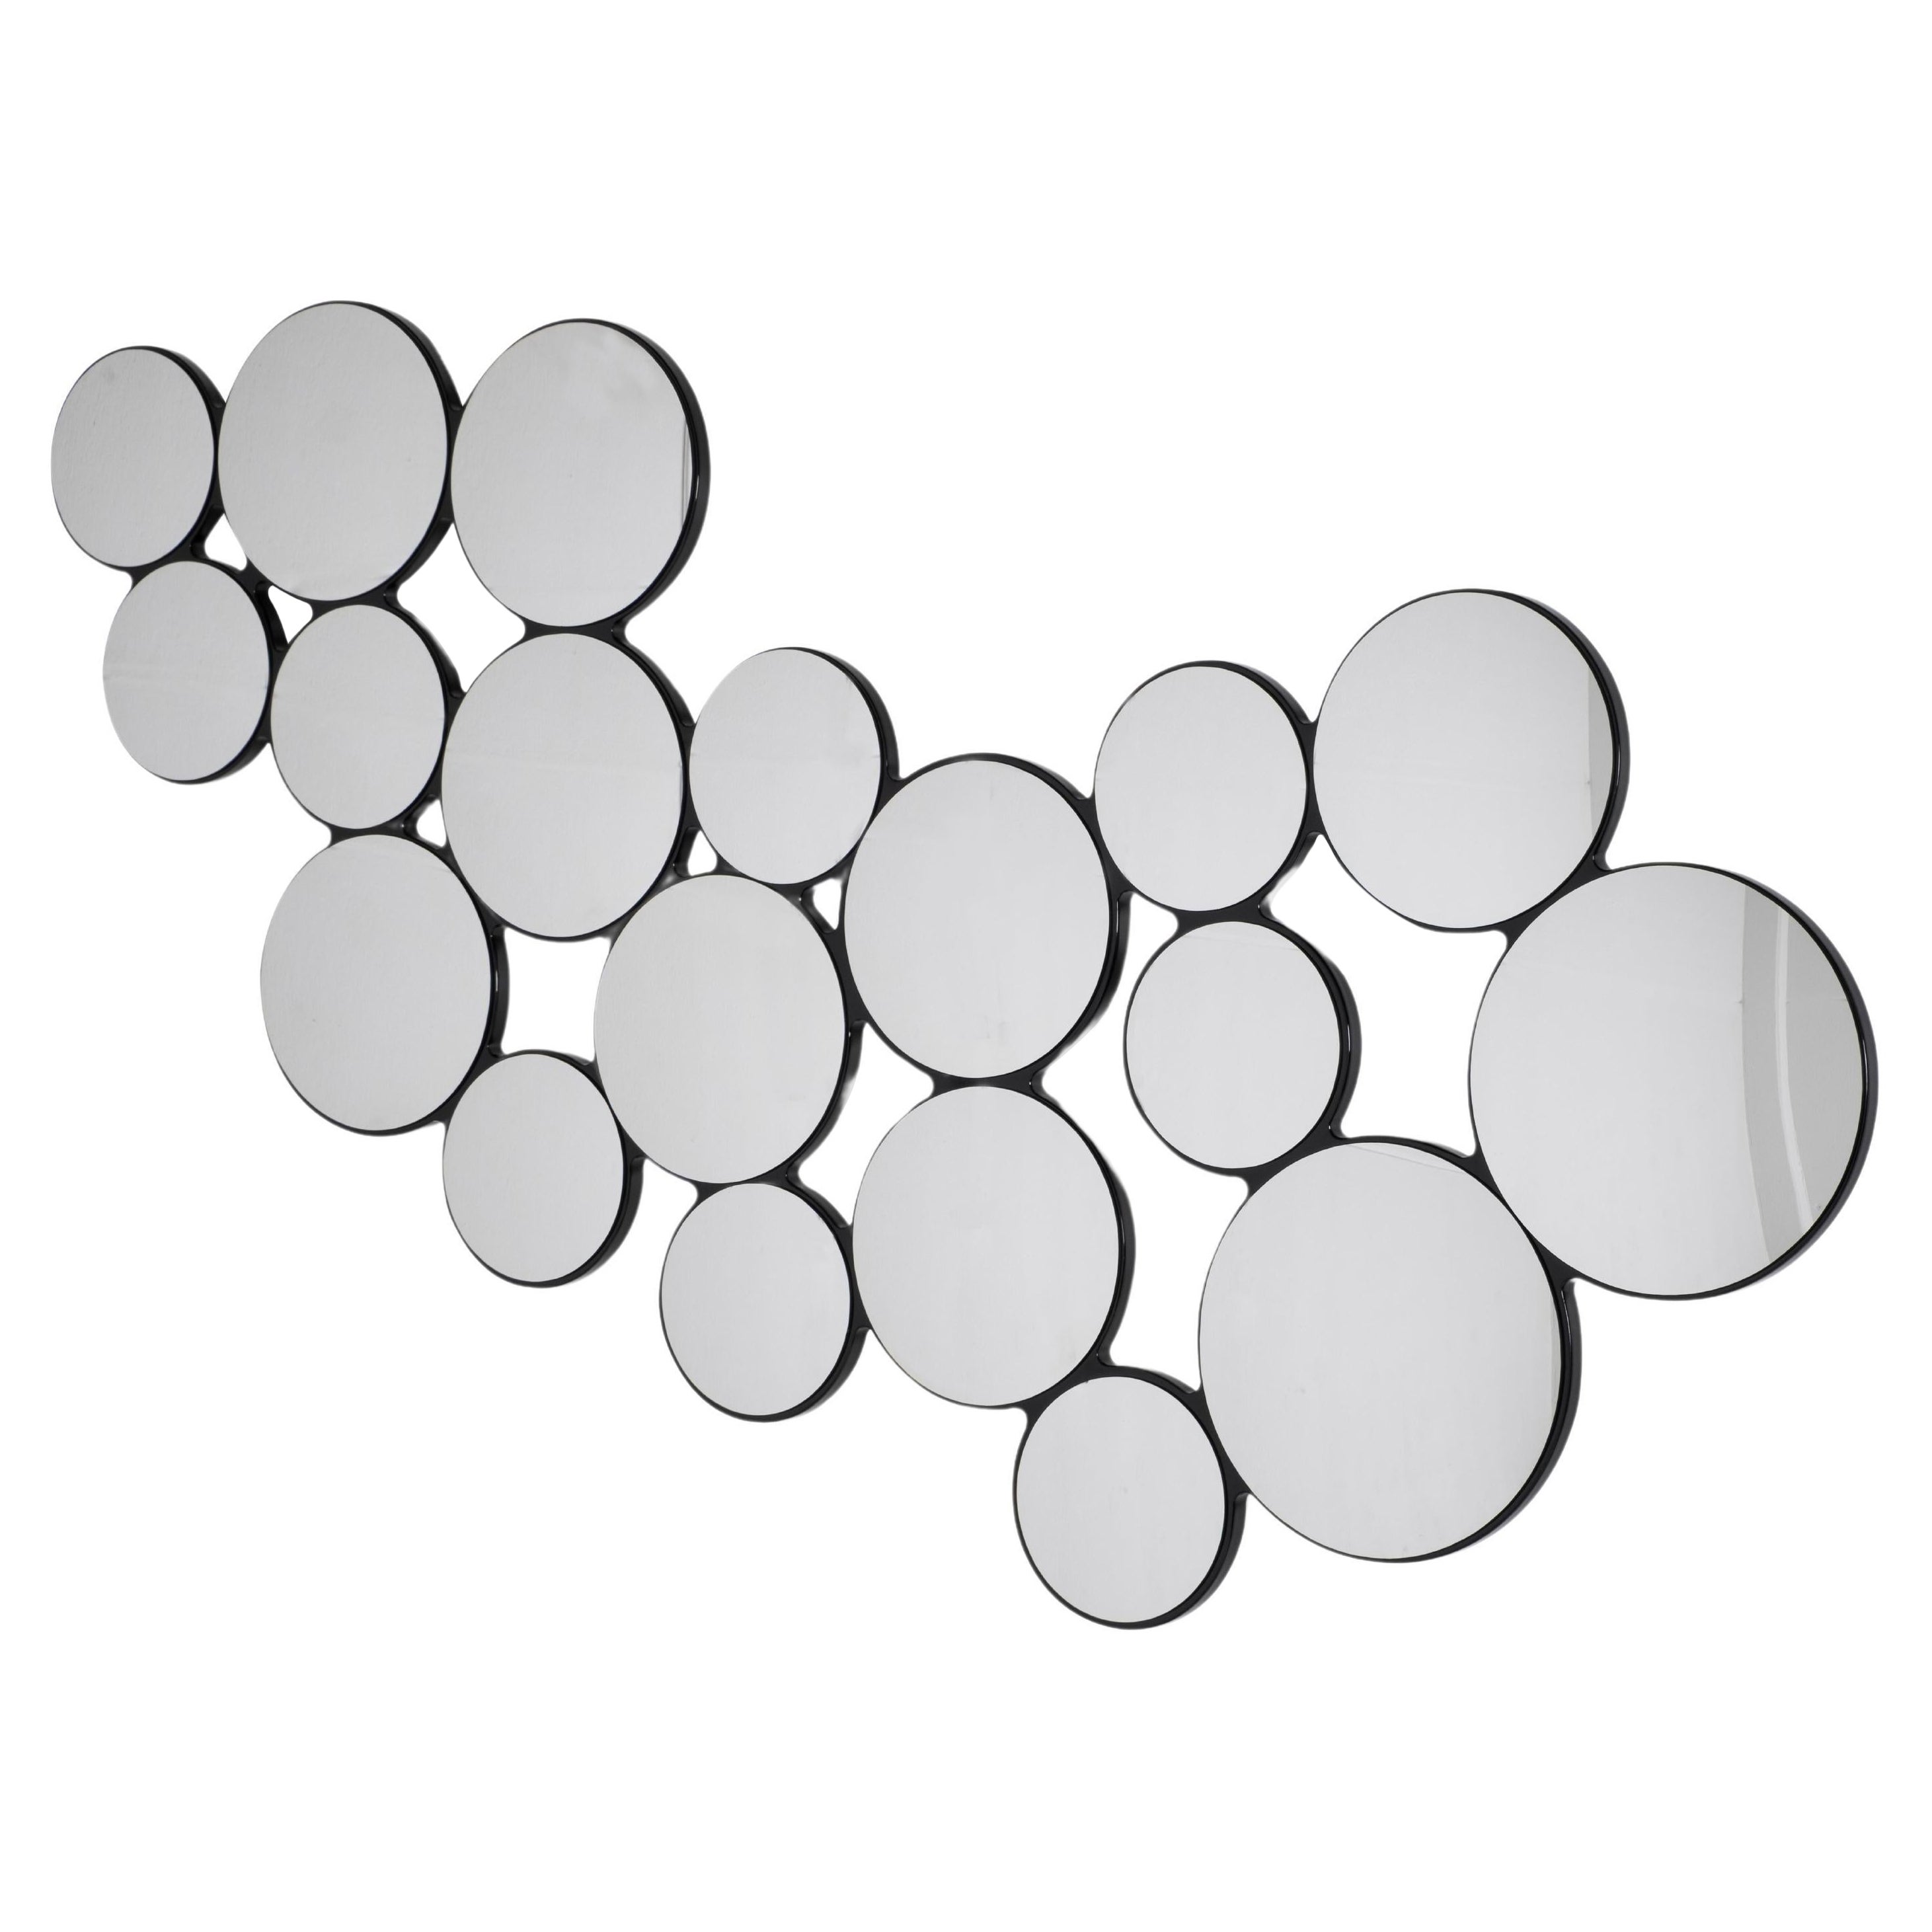 Modern Bubbles 19 Wall Mirror Convex Mirrors Handmade in Portugal by Greenapple